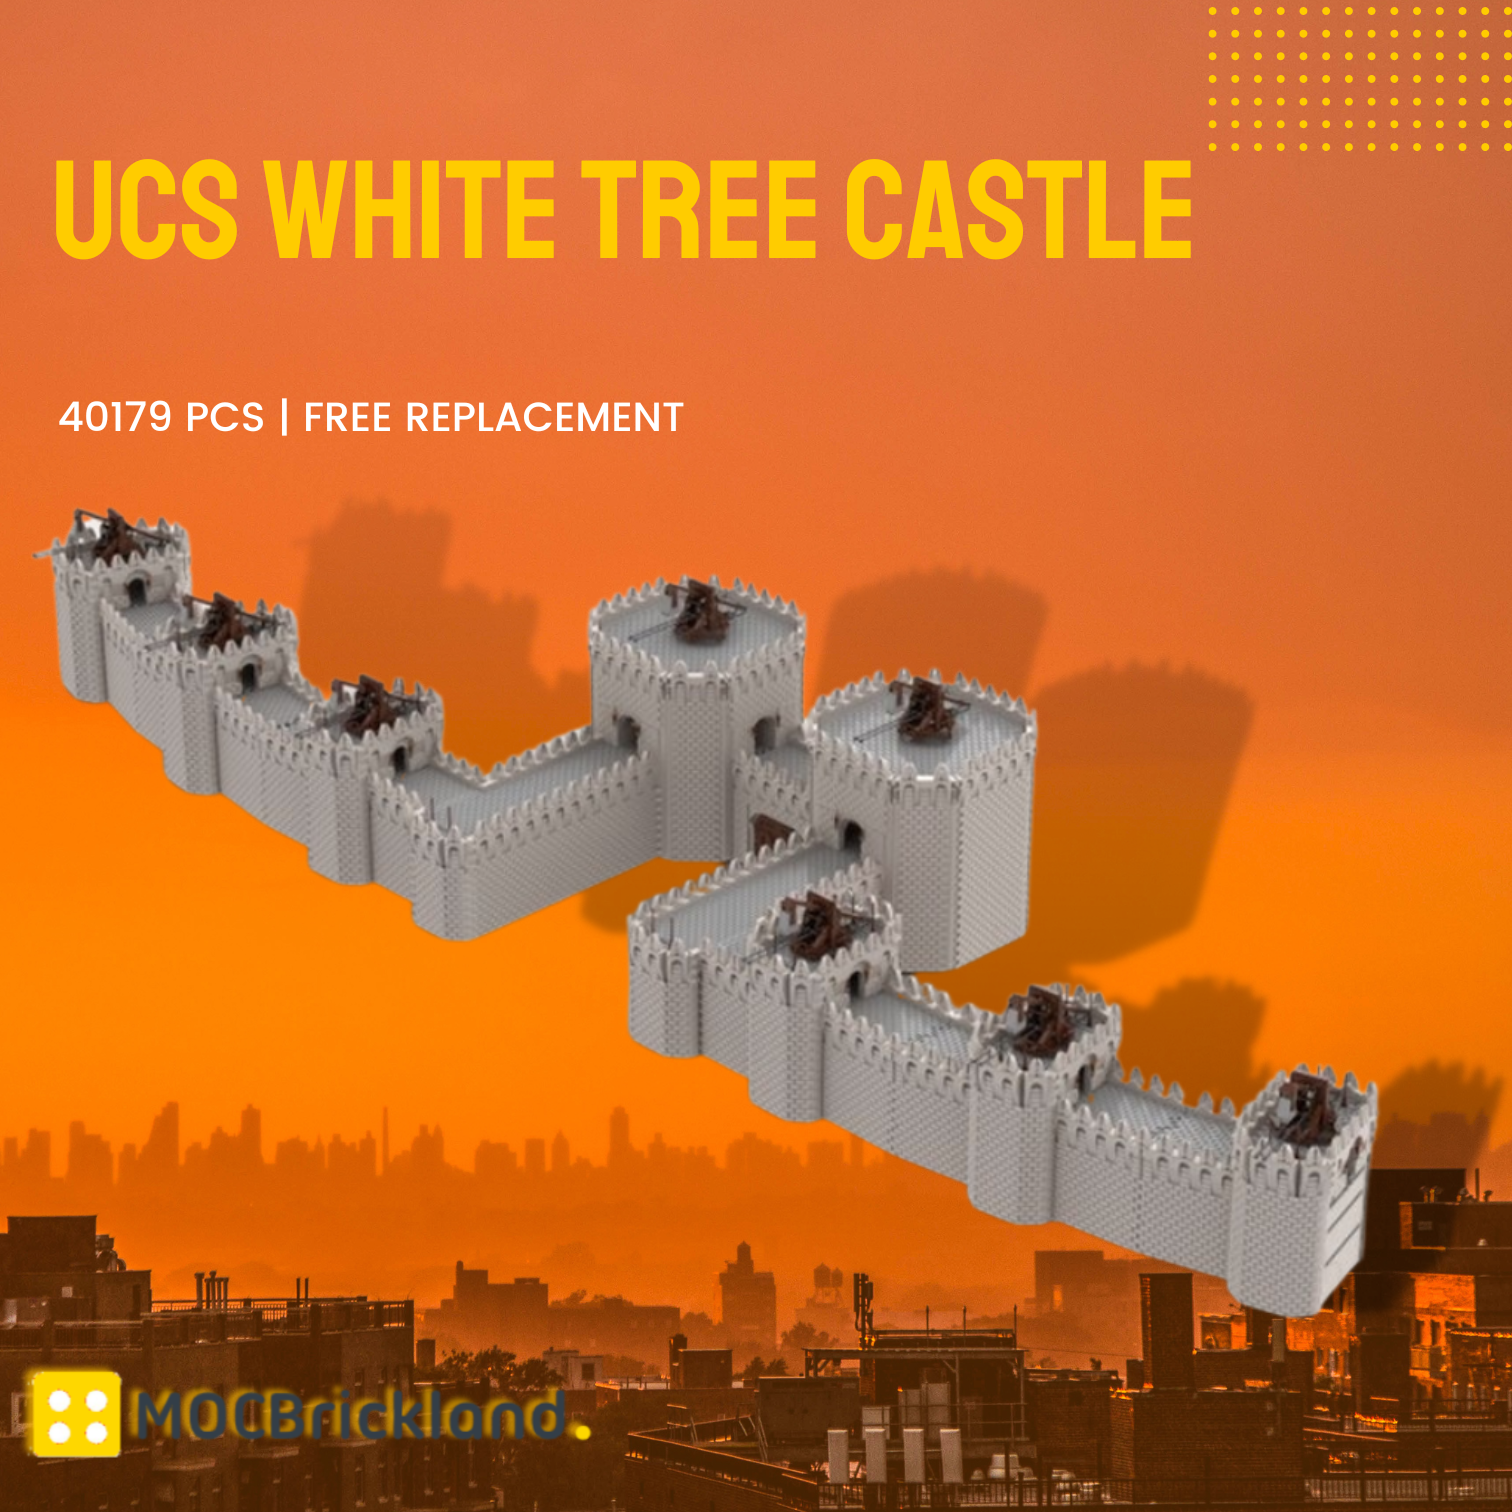 UCS White Tree Castle MOC-113467 Modular Building With 40179 Pieces